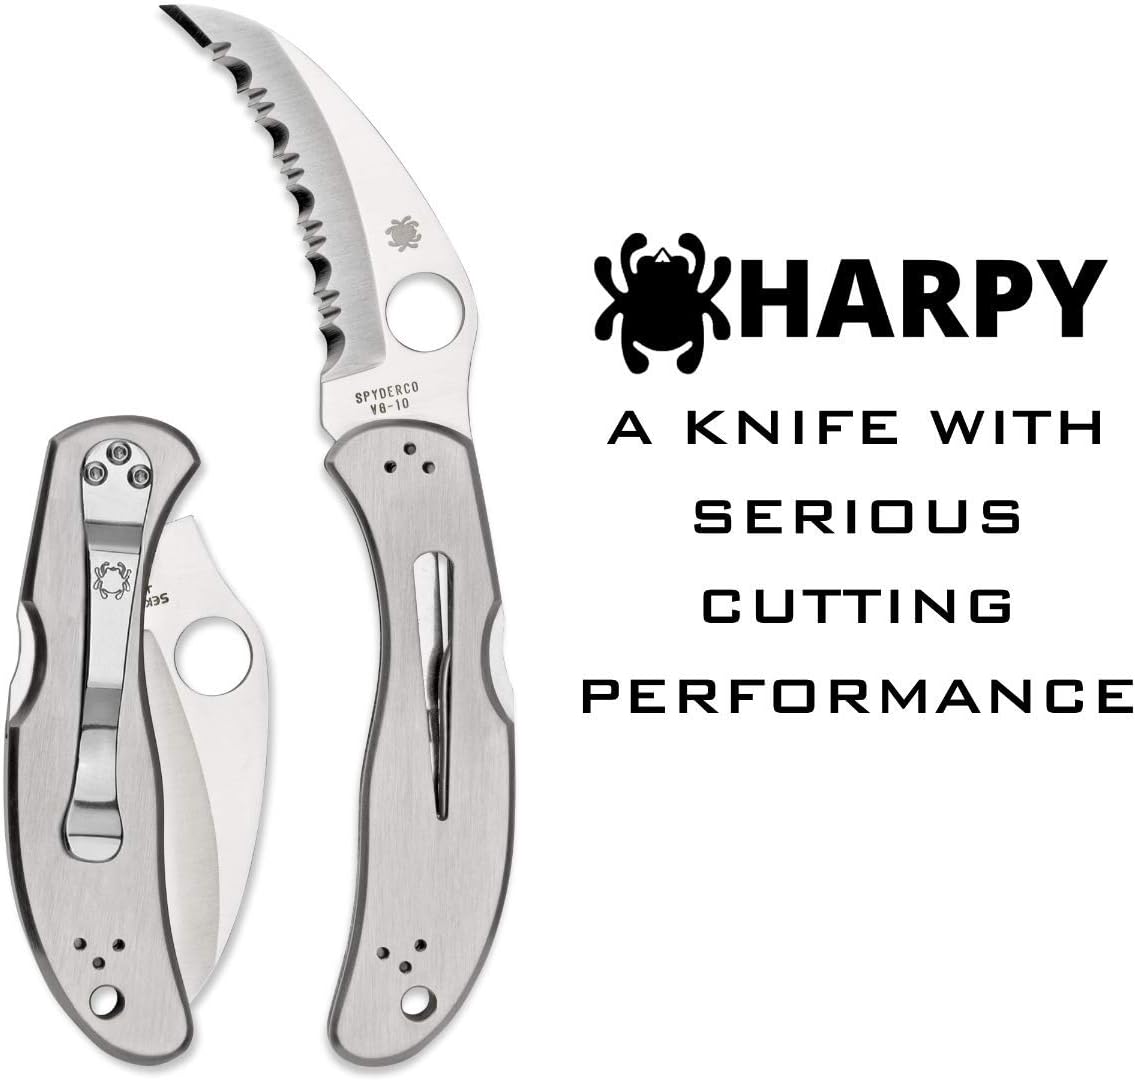 Spyderco, Harpy Folding Utility Knife with 2.75" Hawkbill VG-10 Steel Blade and Durable Stainless Steel Handle - SpyderEdge - C08S